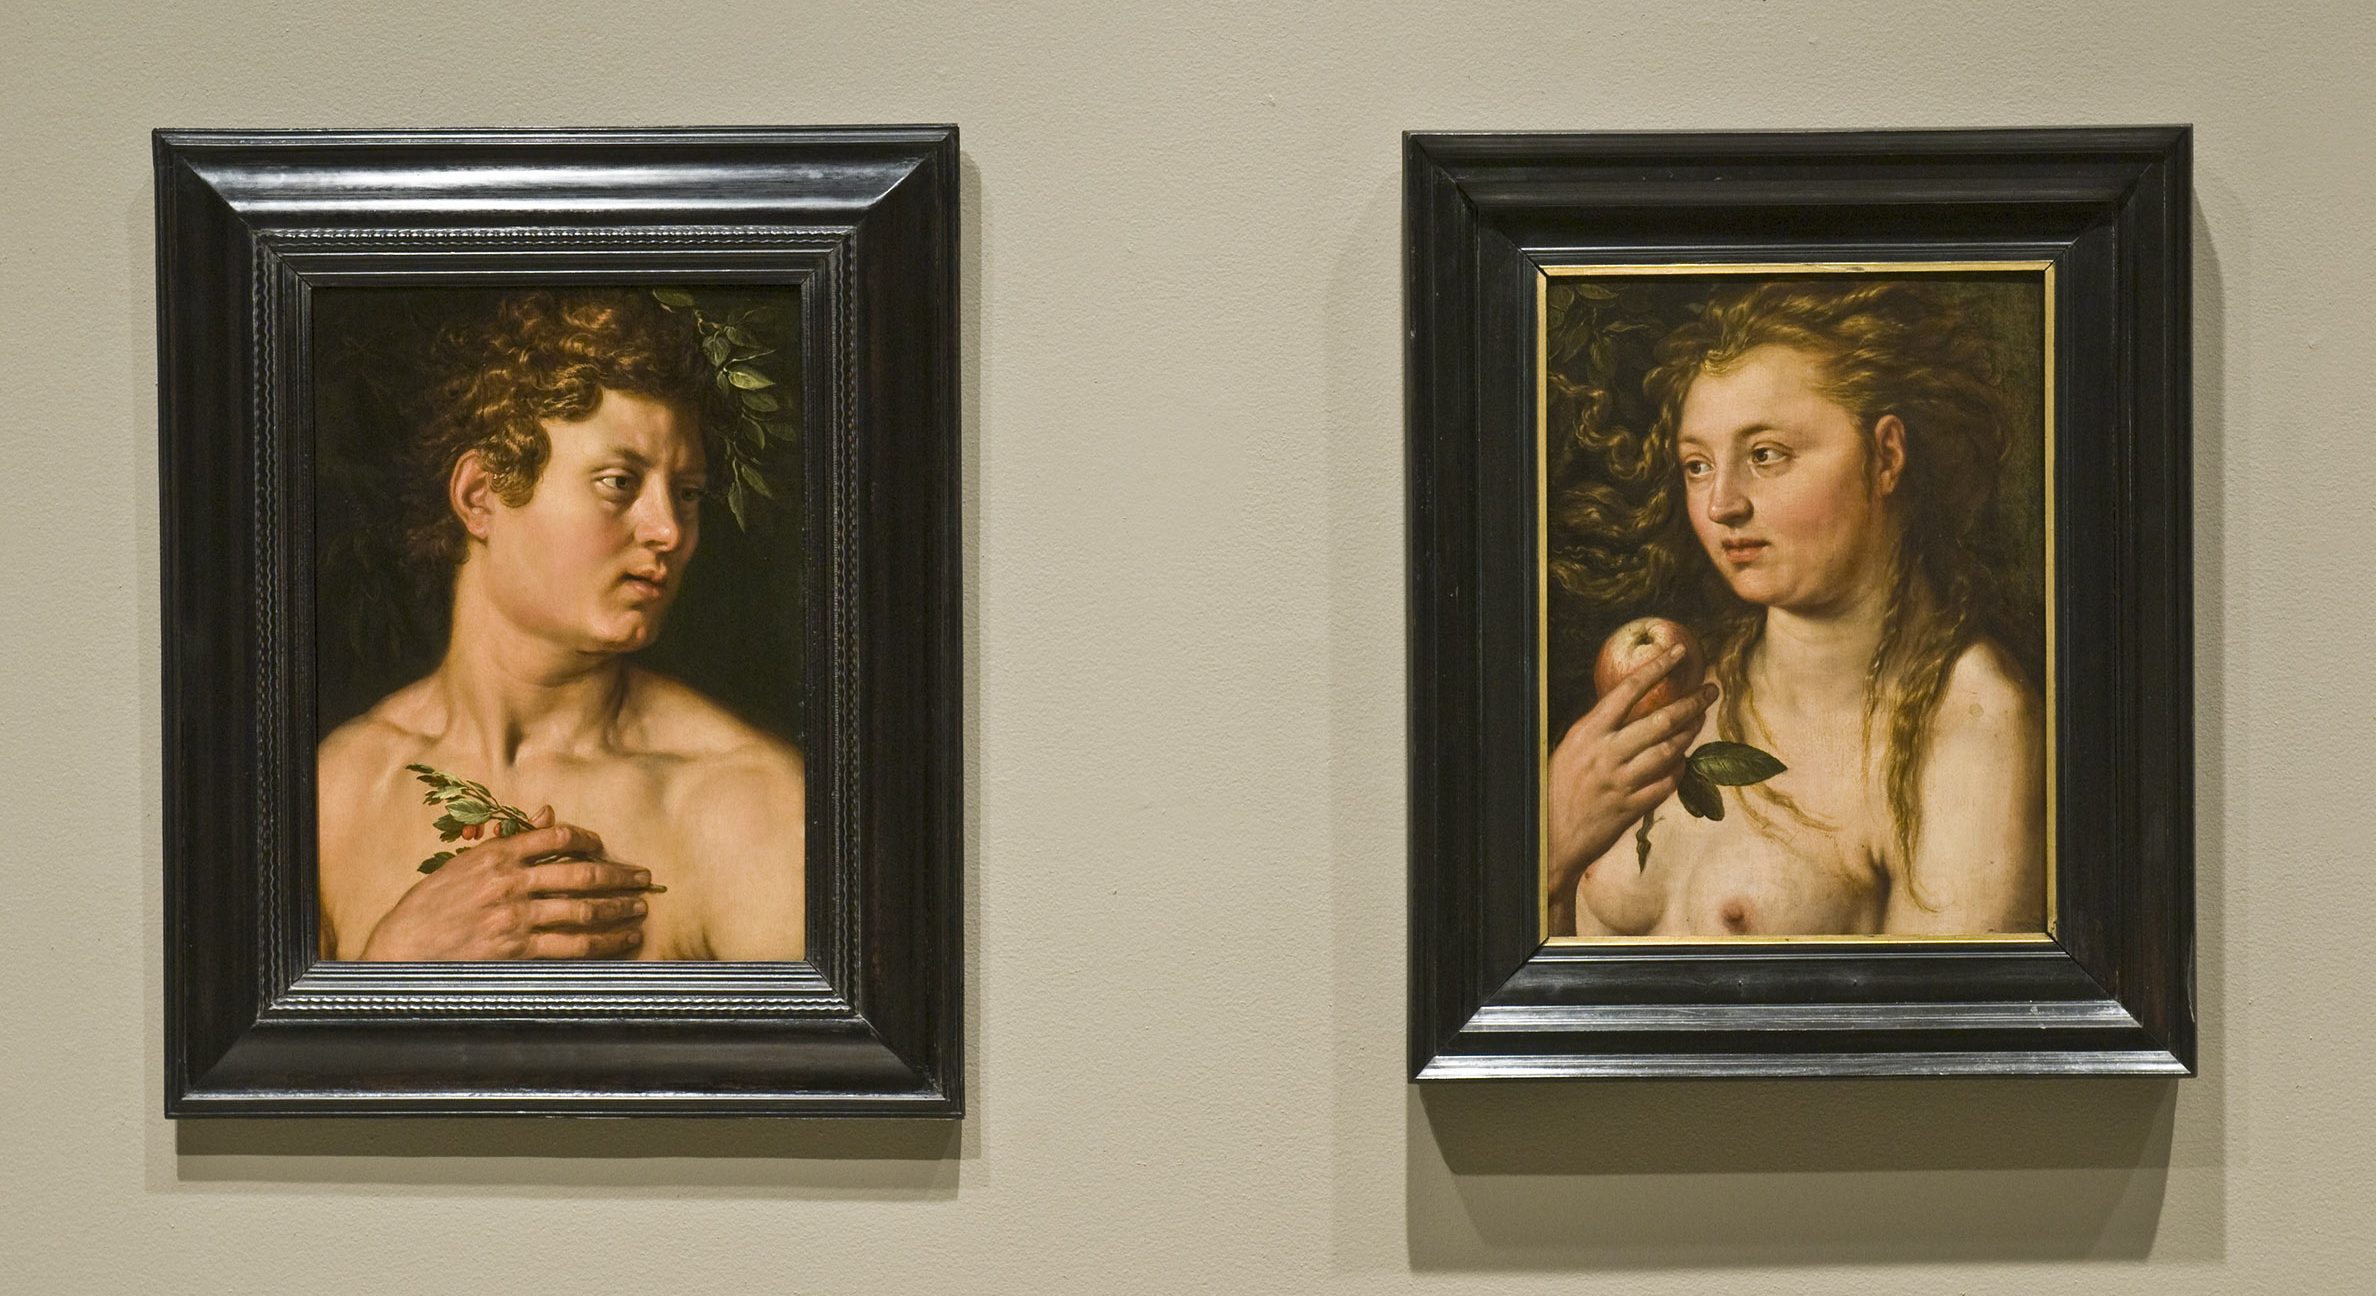 Adam and Eve by Hendrick Goltzius